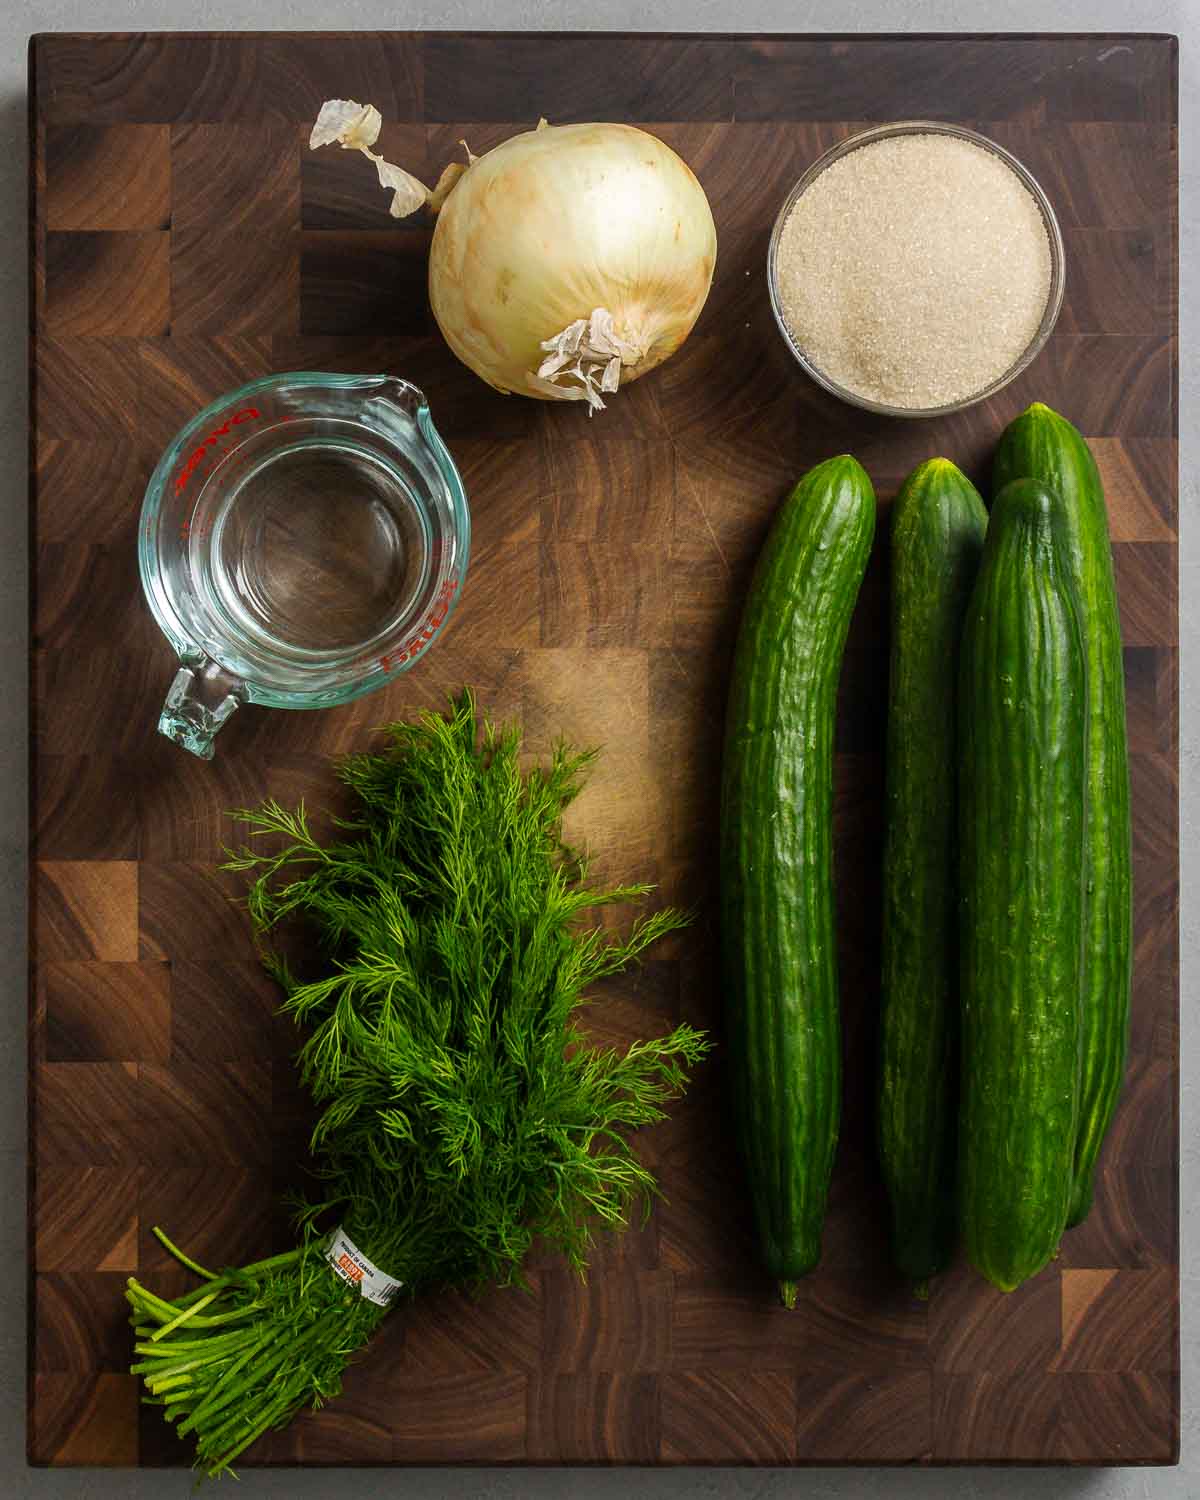 Ingredients shown: onion, sugar, white vinegar, dill, and cucumbers.